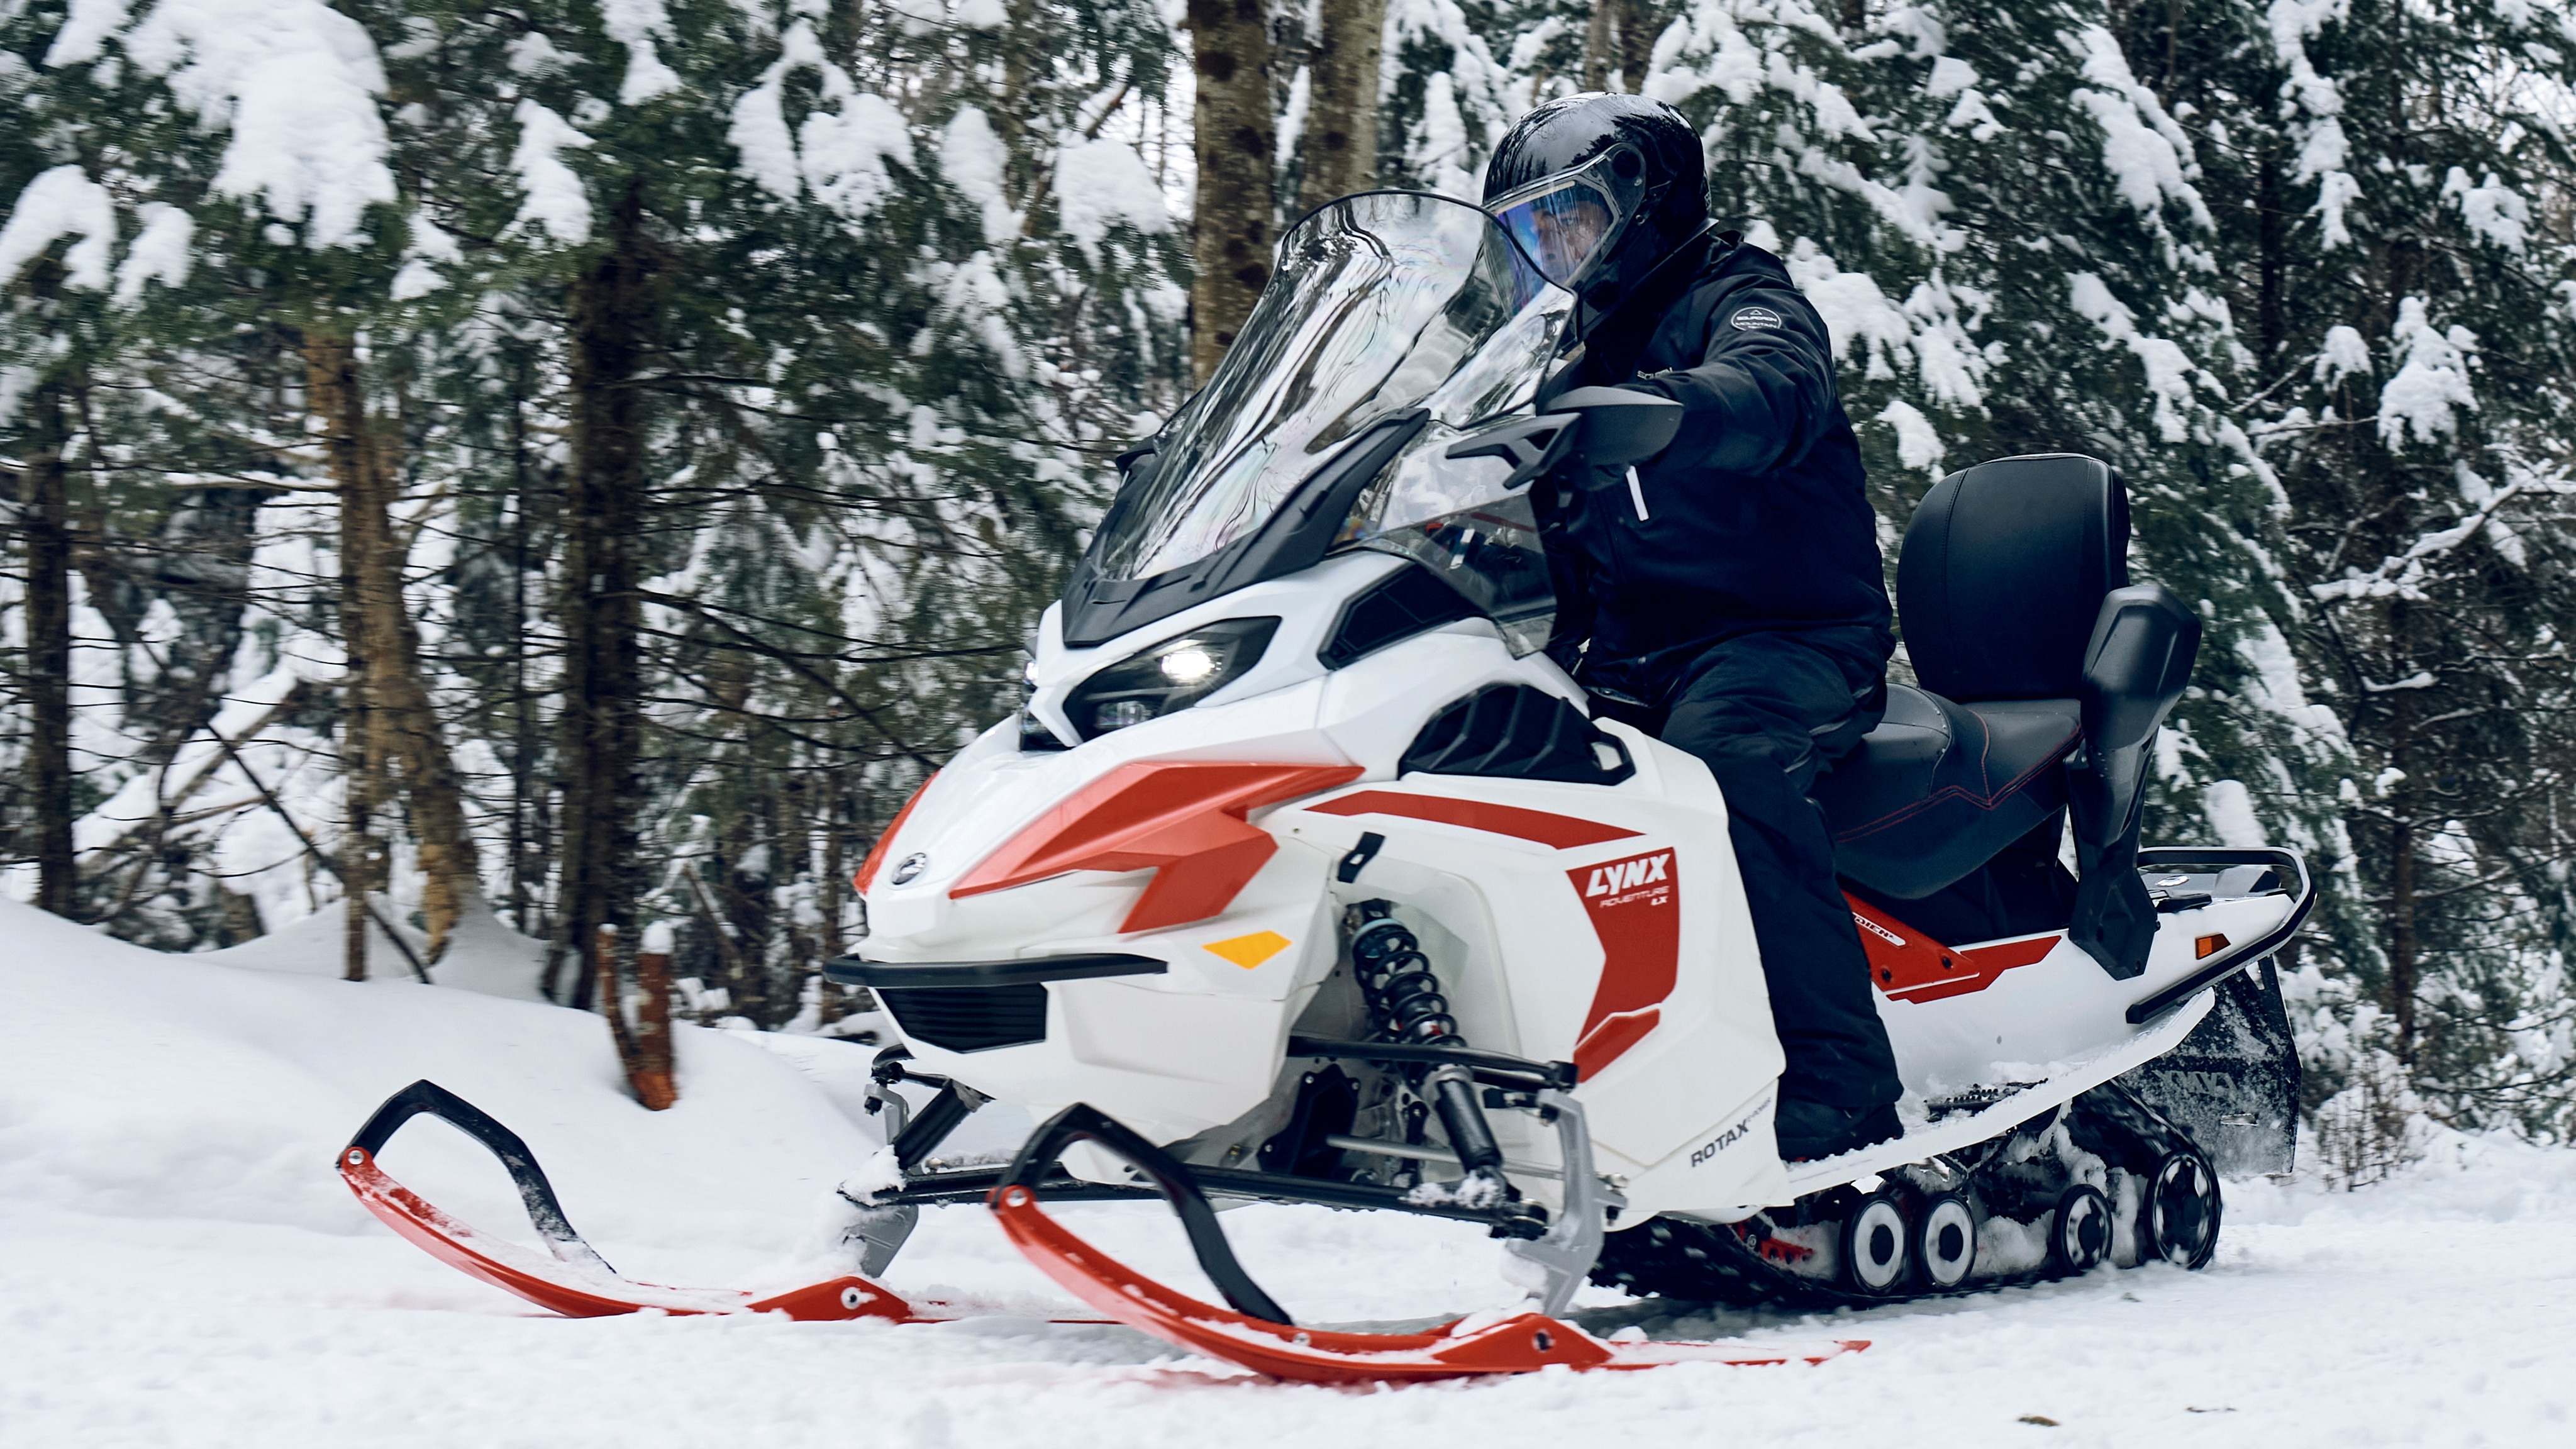 electric ski-doo grand touring in action